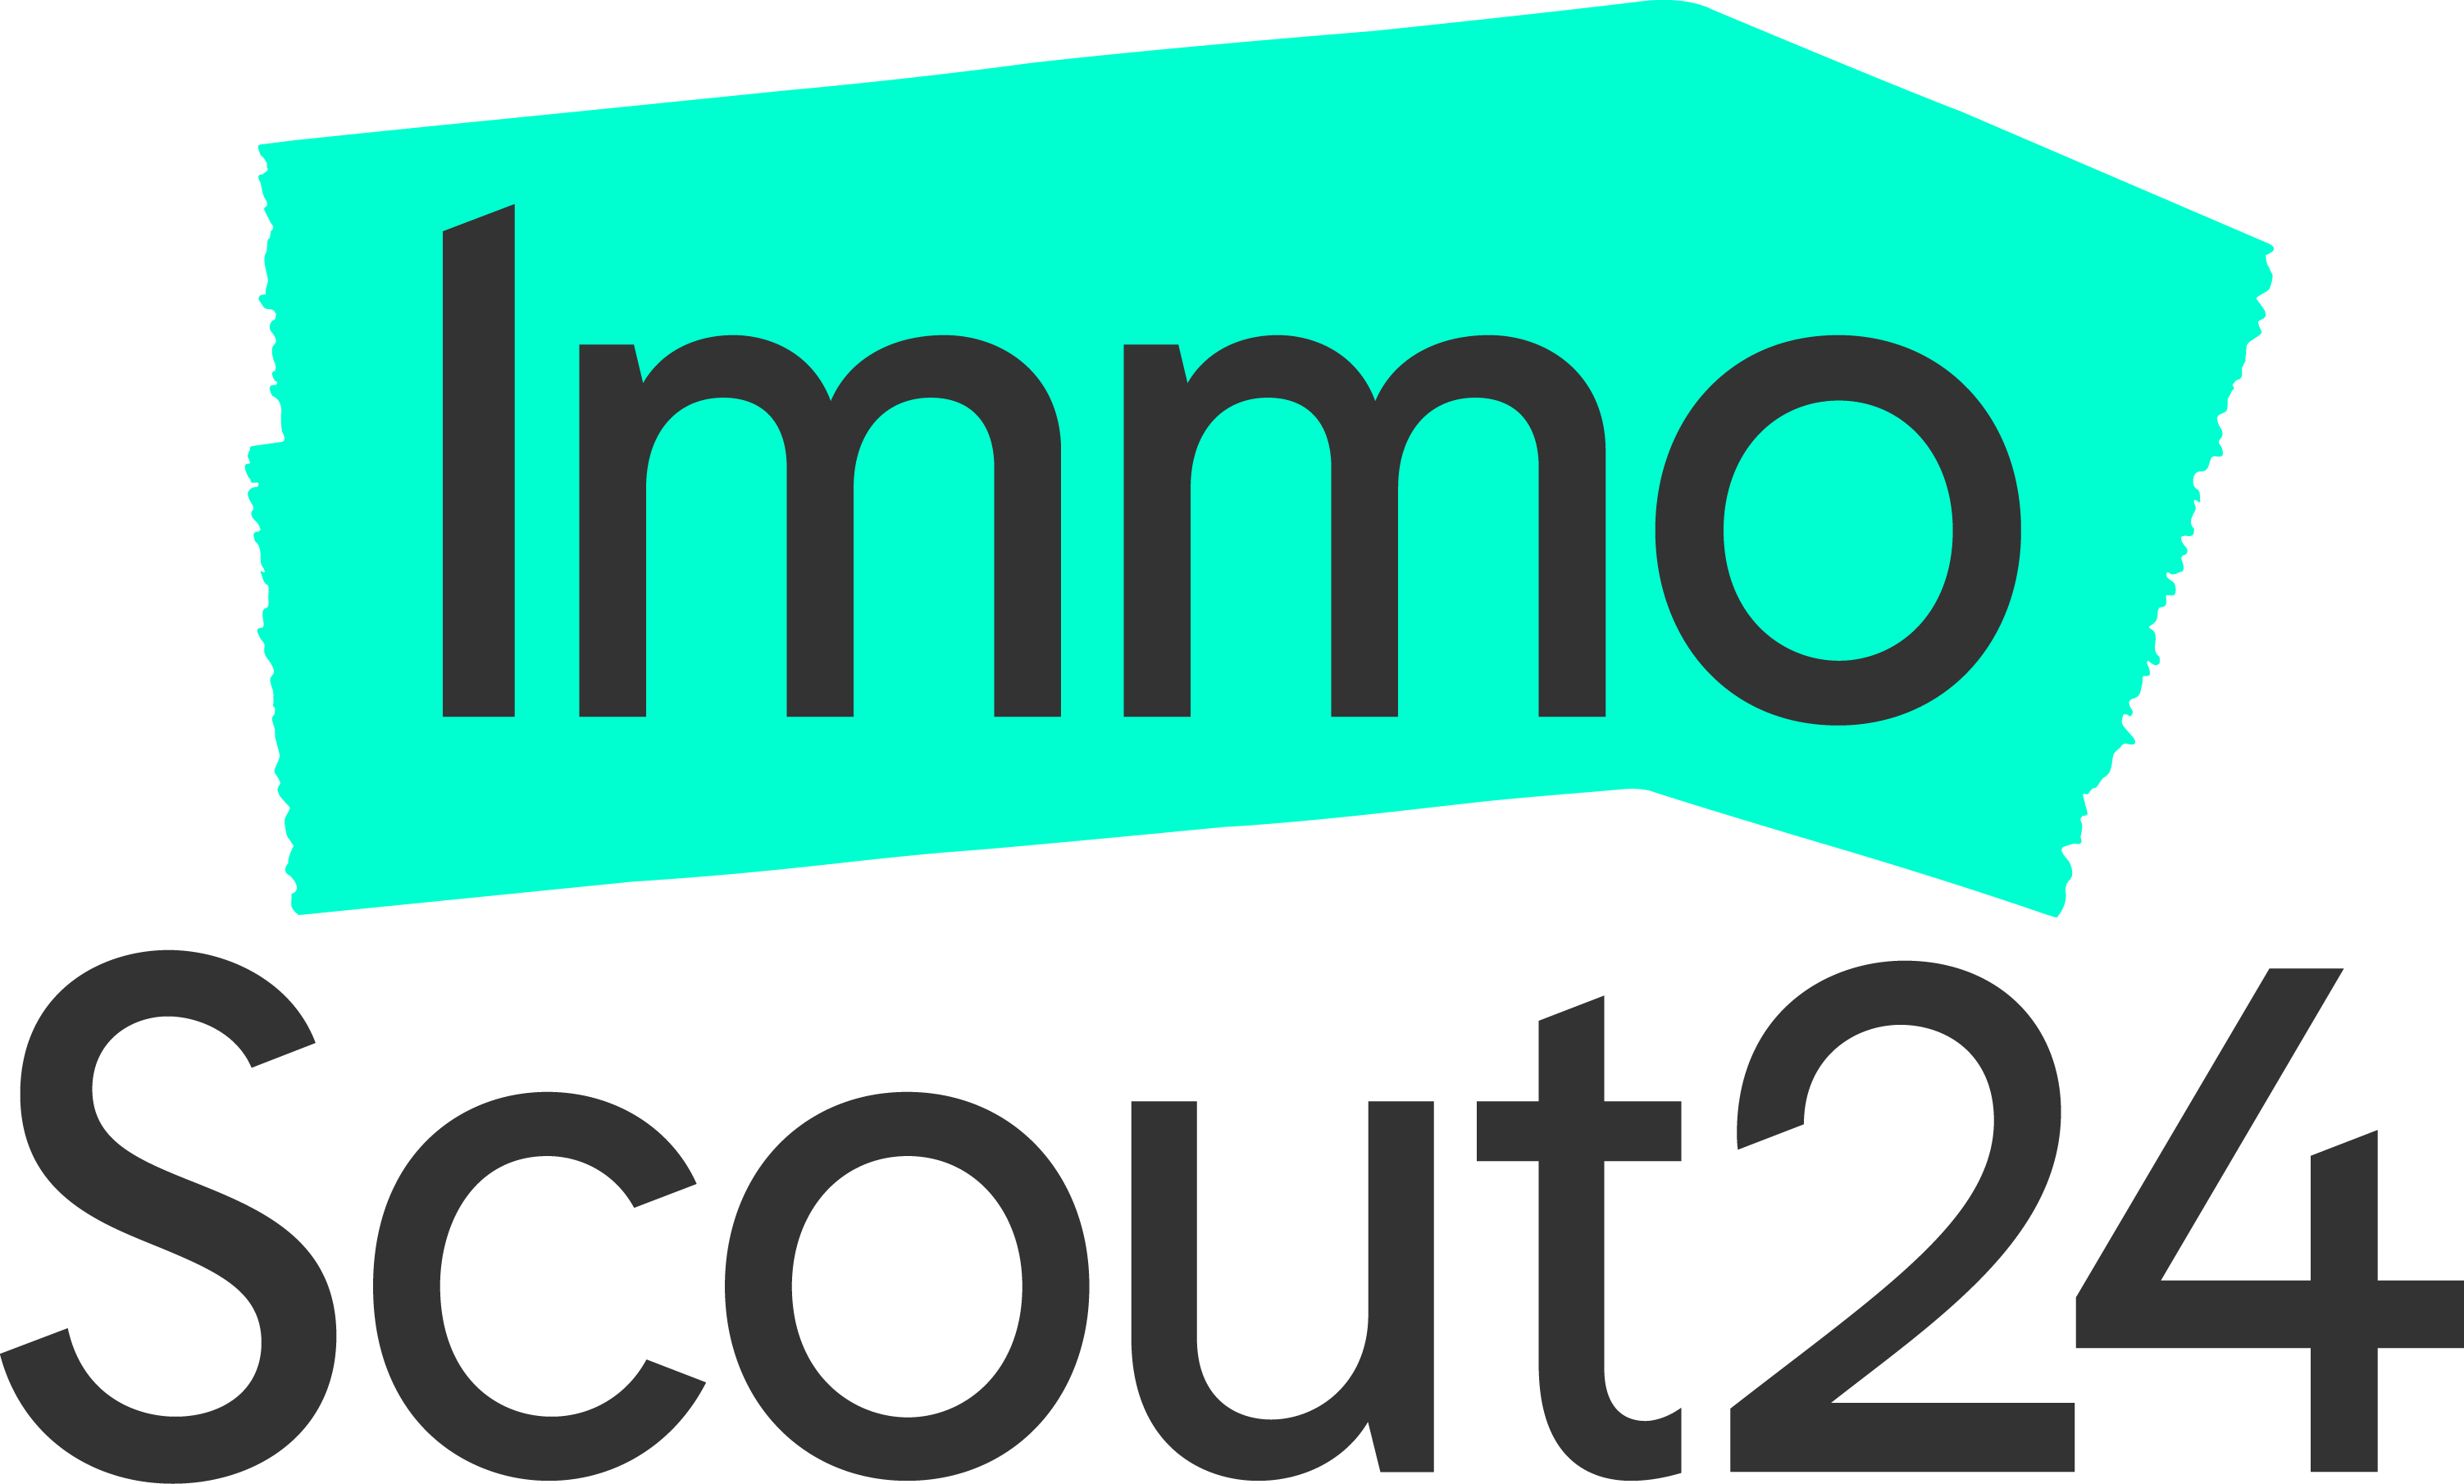 Immoscout